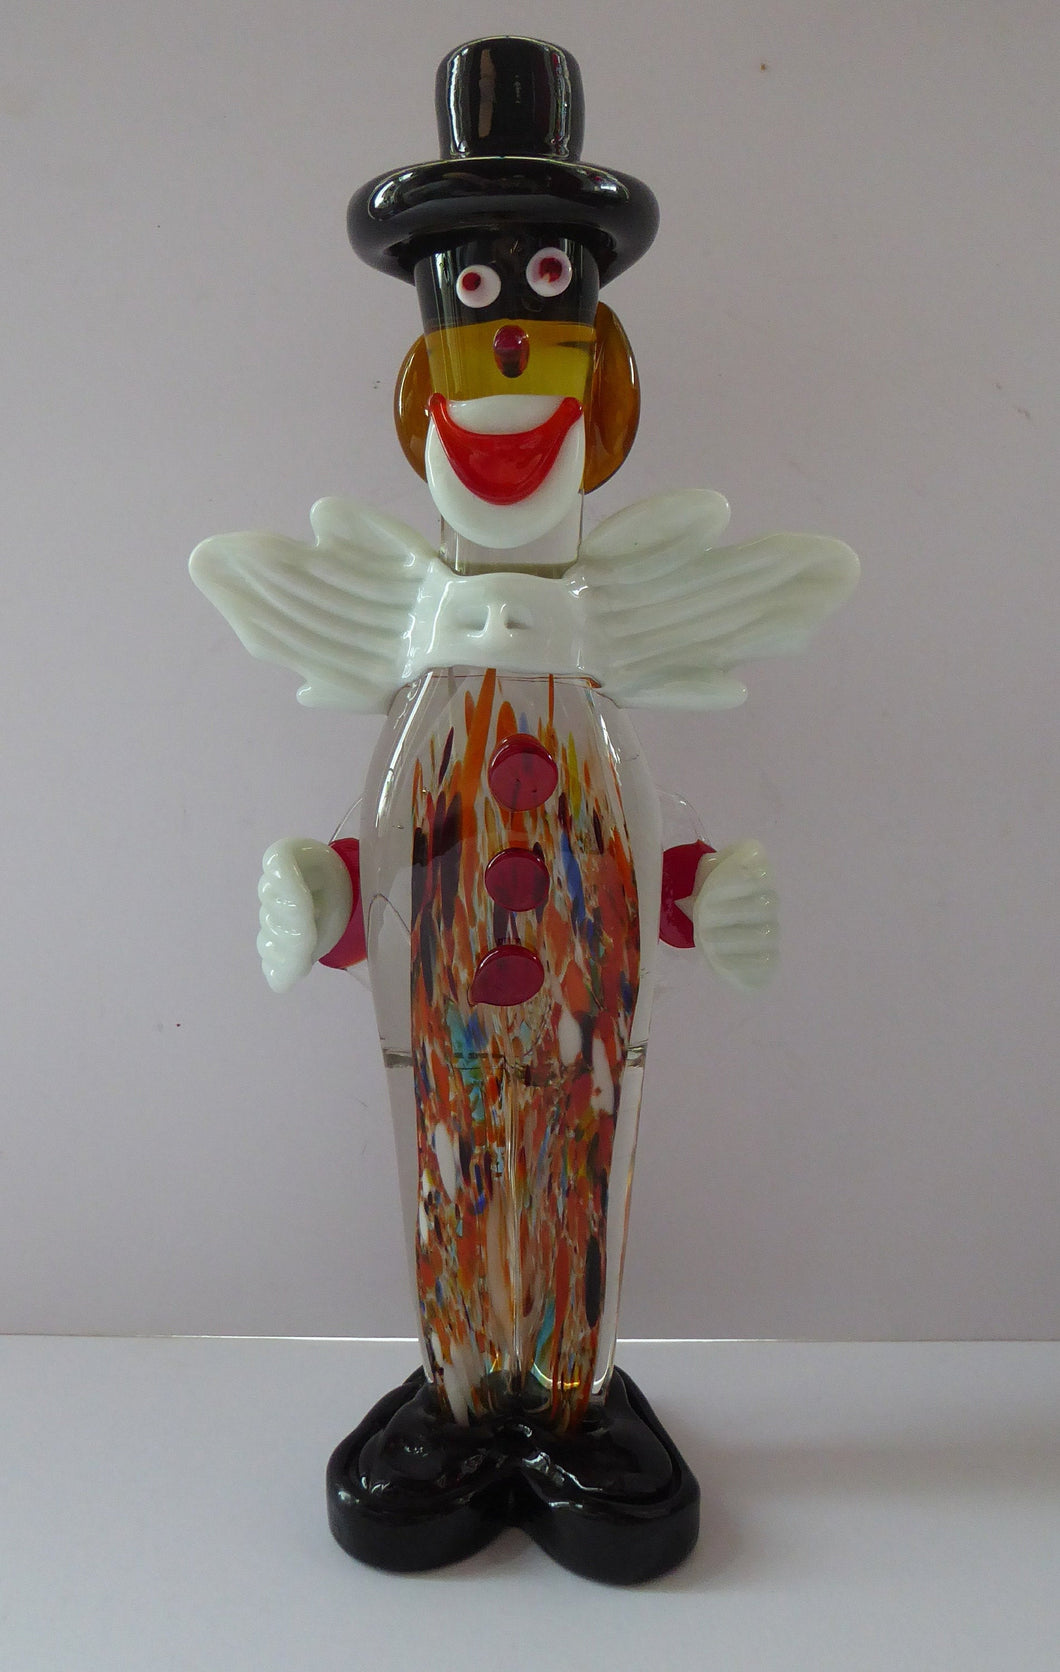 LARGE 12 3/4 inches Vintage MURANO GLASS Clown. Black Top Hat and Massive White Bow